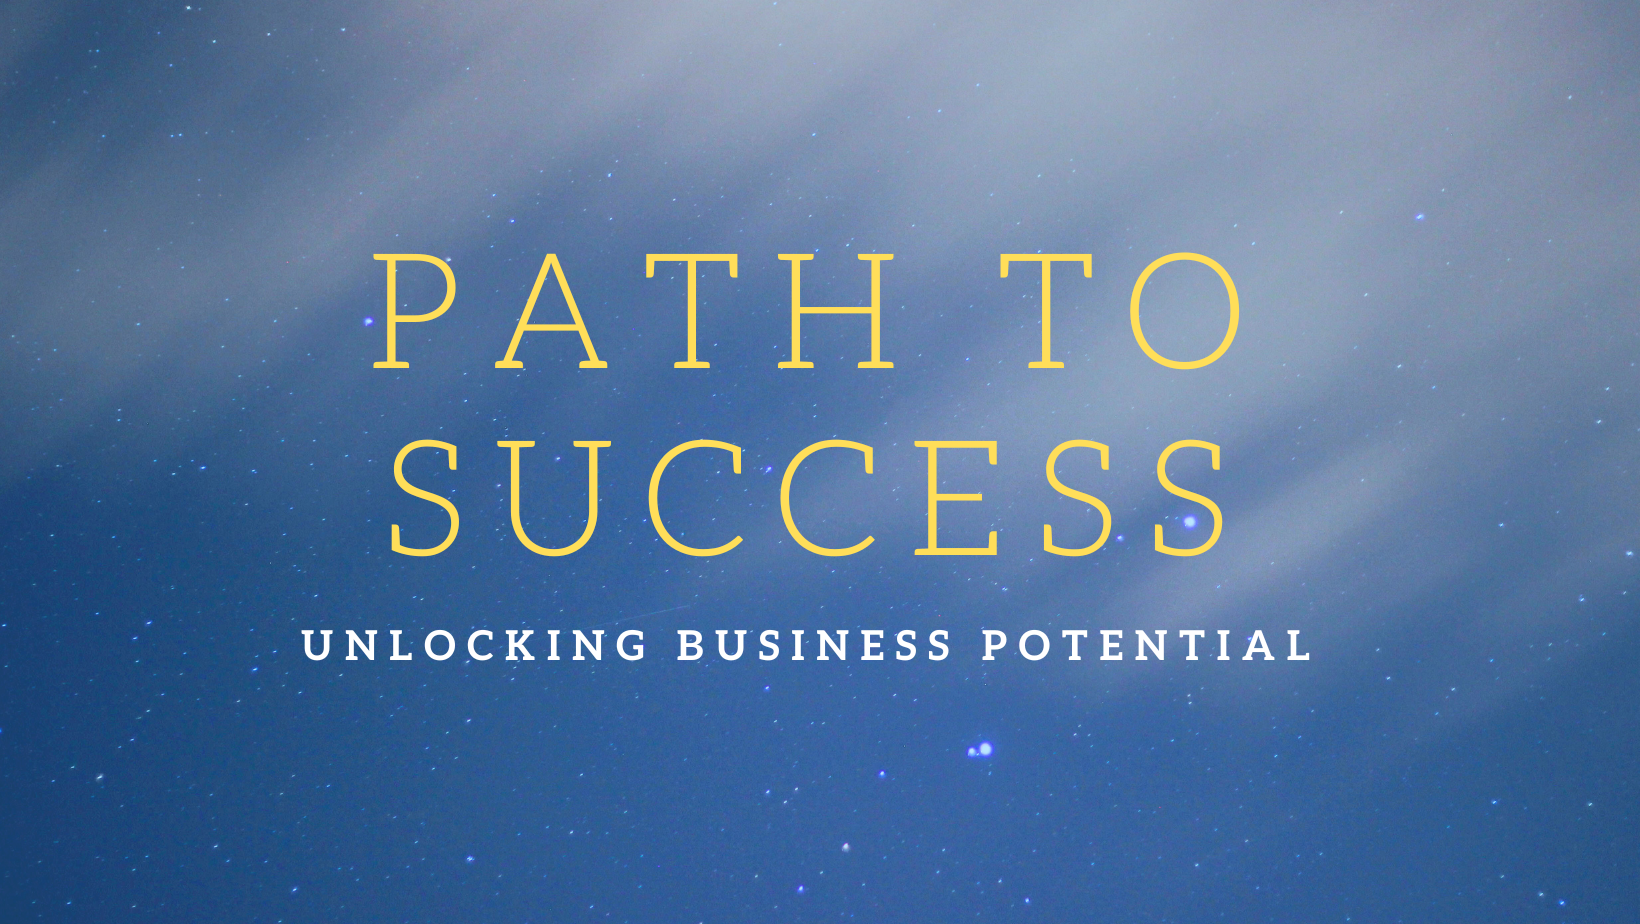 Path to Success in San Diego: Unlocking Your Business Potential